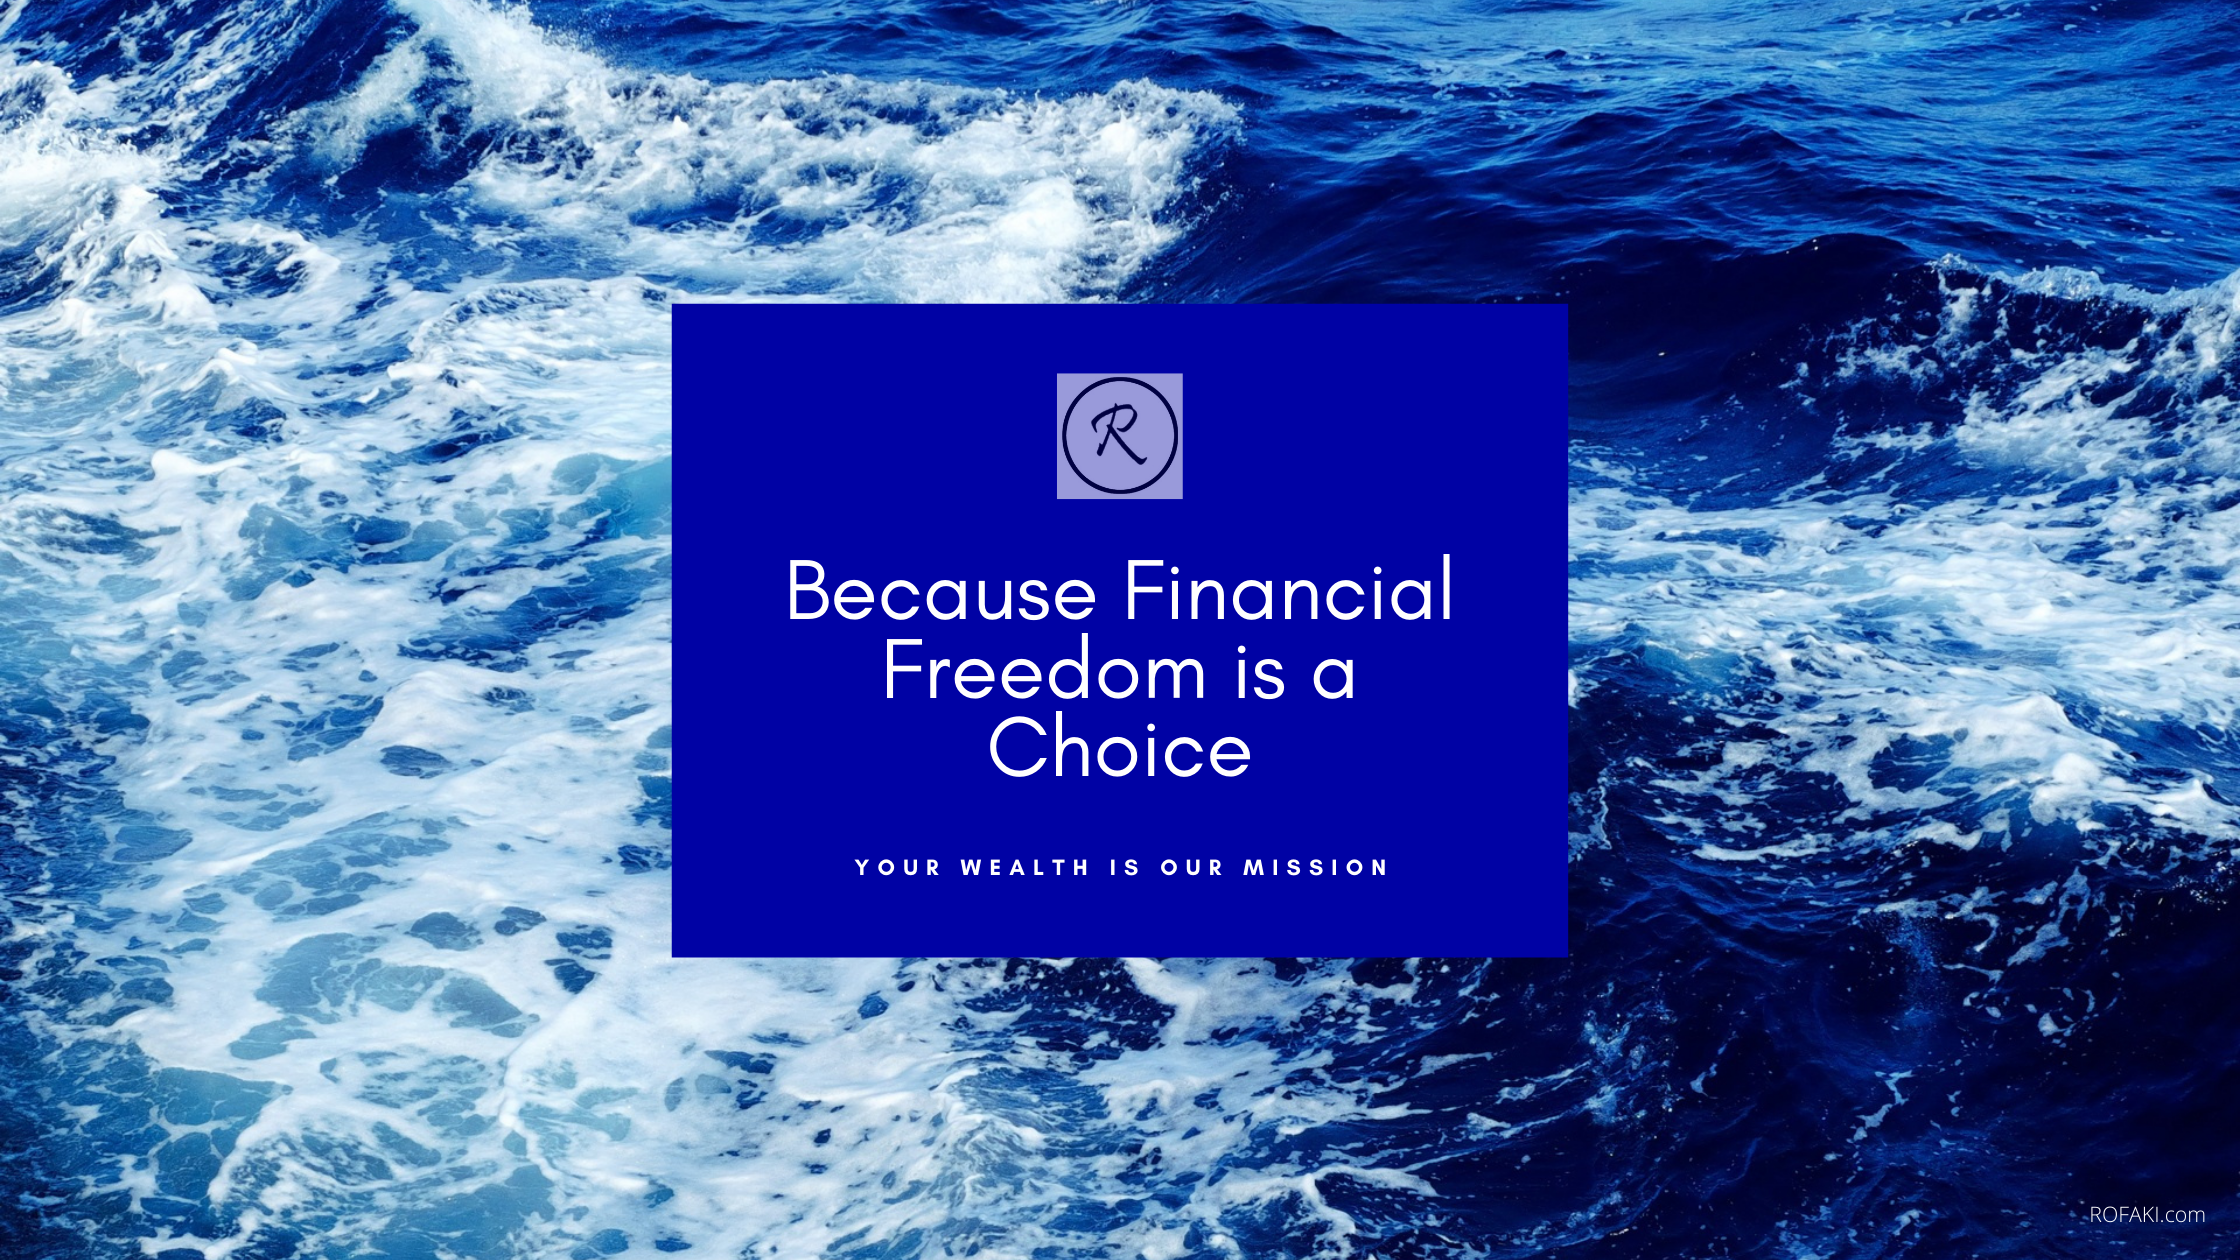 Because Financial Freedom is a Choice